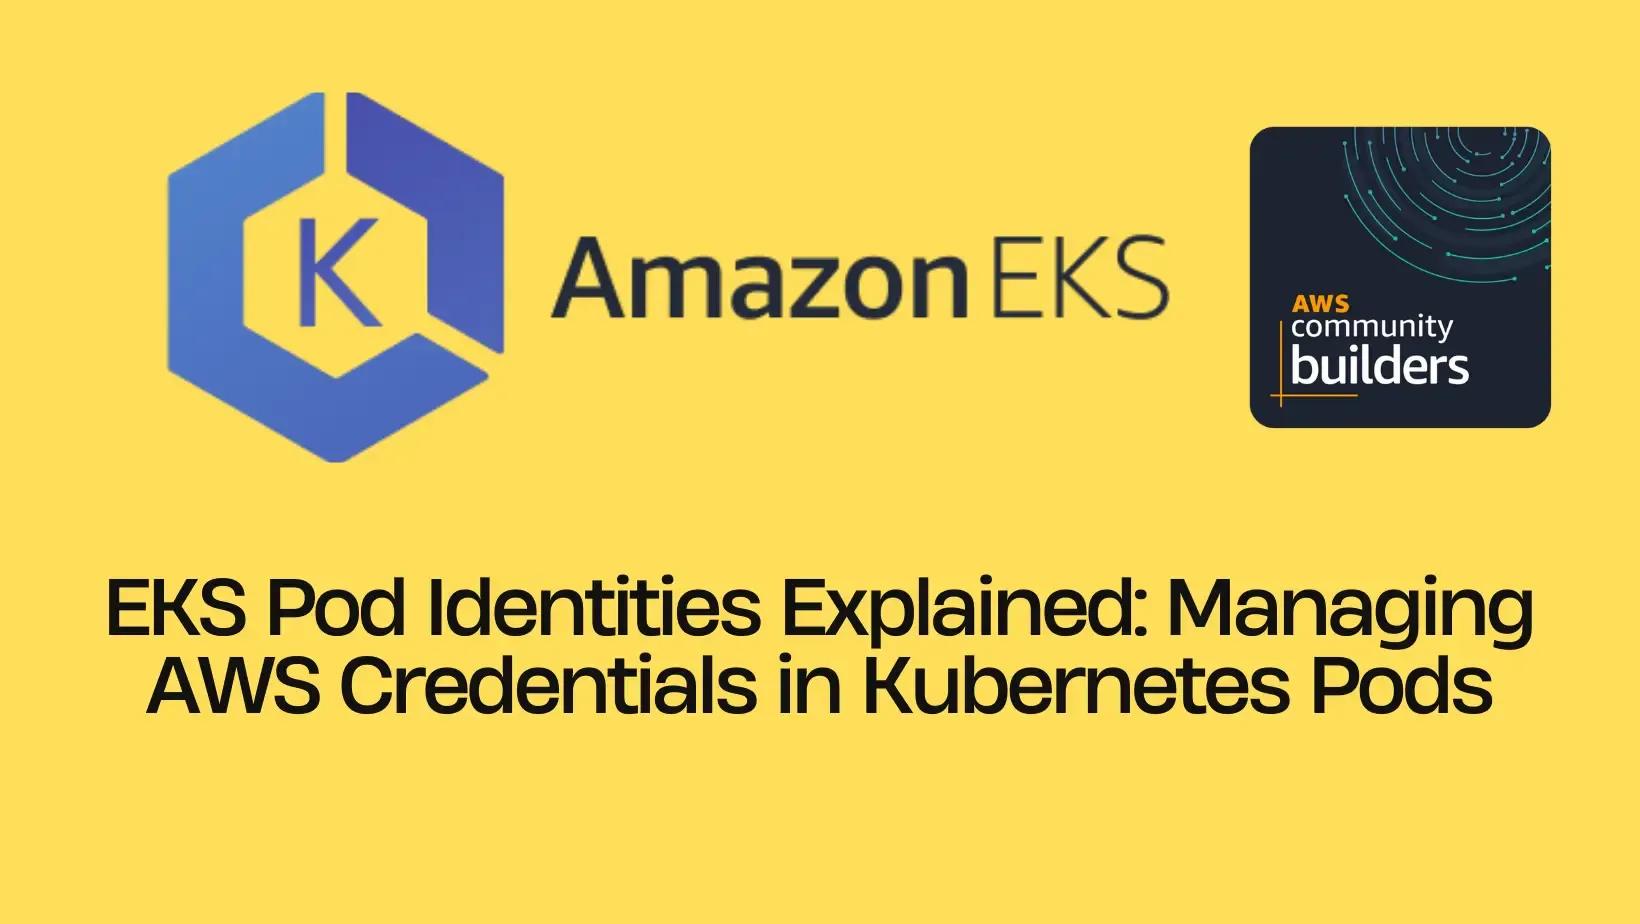 EKS Pod Identities Explained: Managing AWS Credentials in Kubernetes Pods